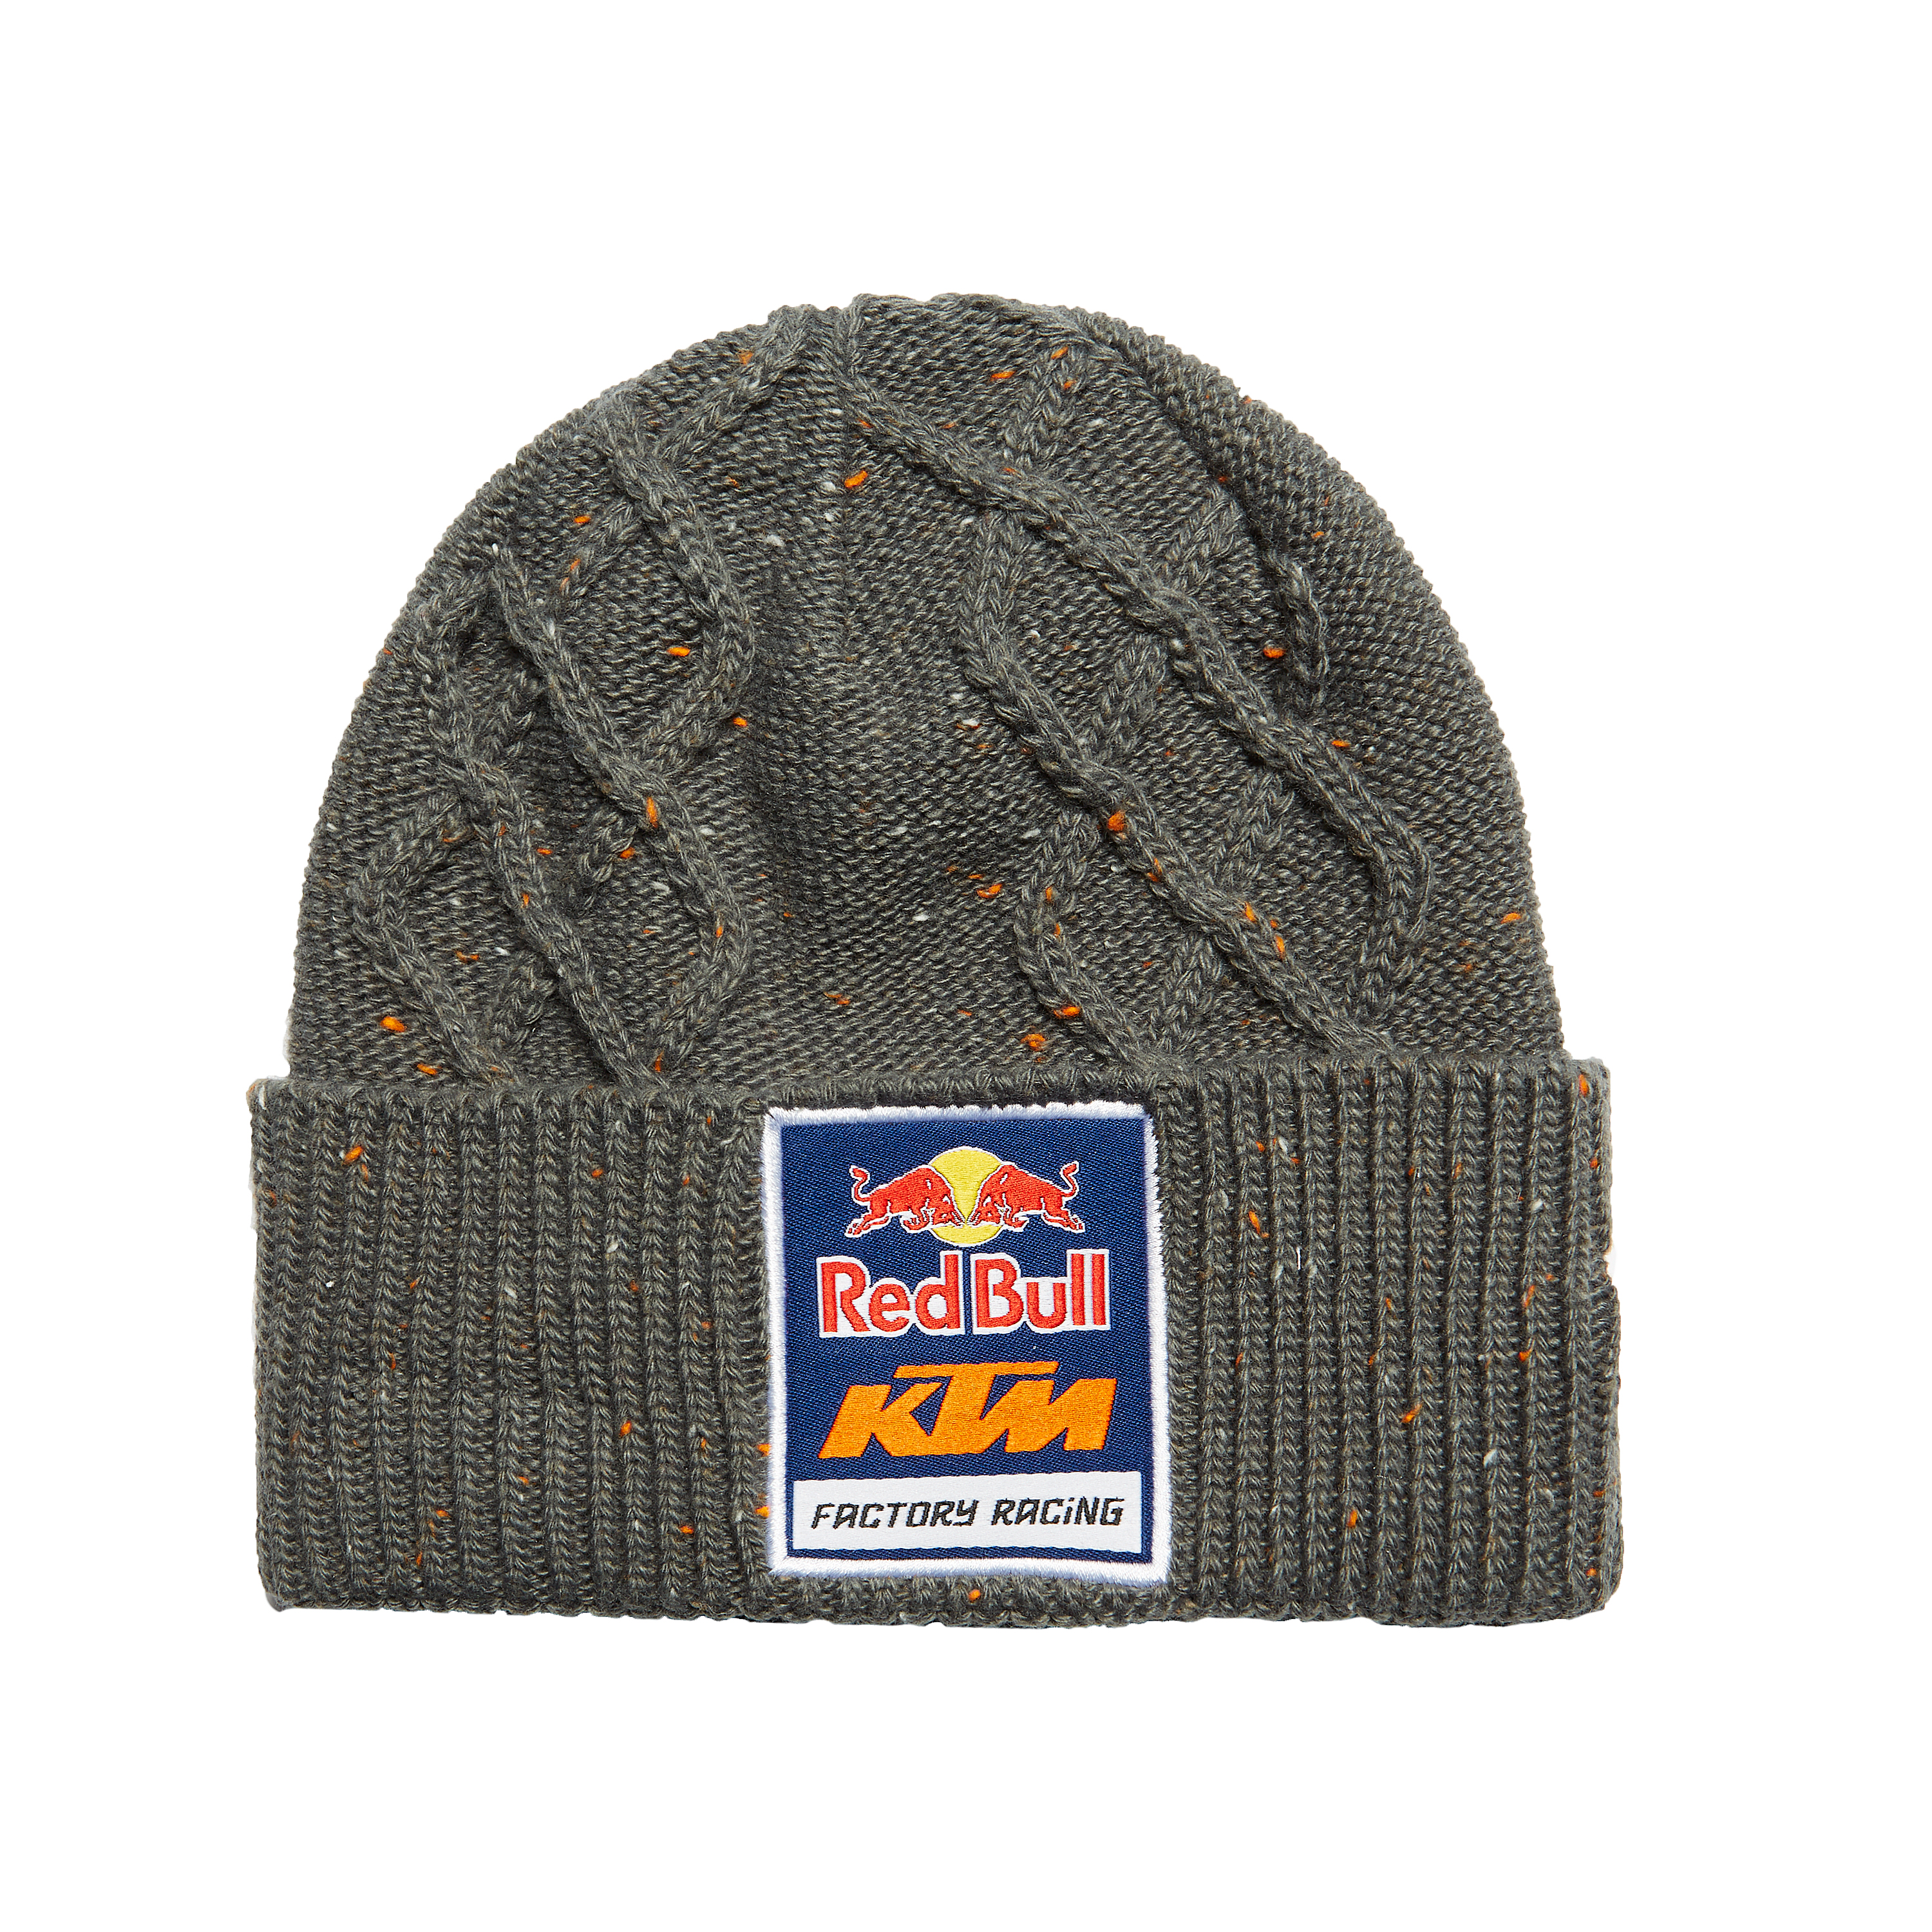 Main image of Red Bull KTM Factory Racing Speckled Cable Knit Beanie Grey